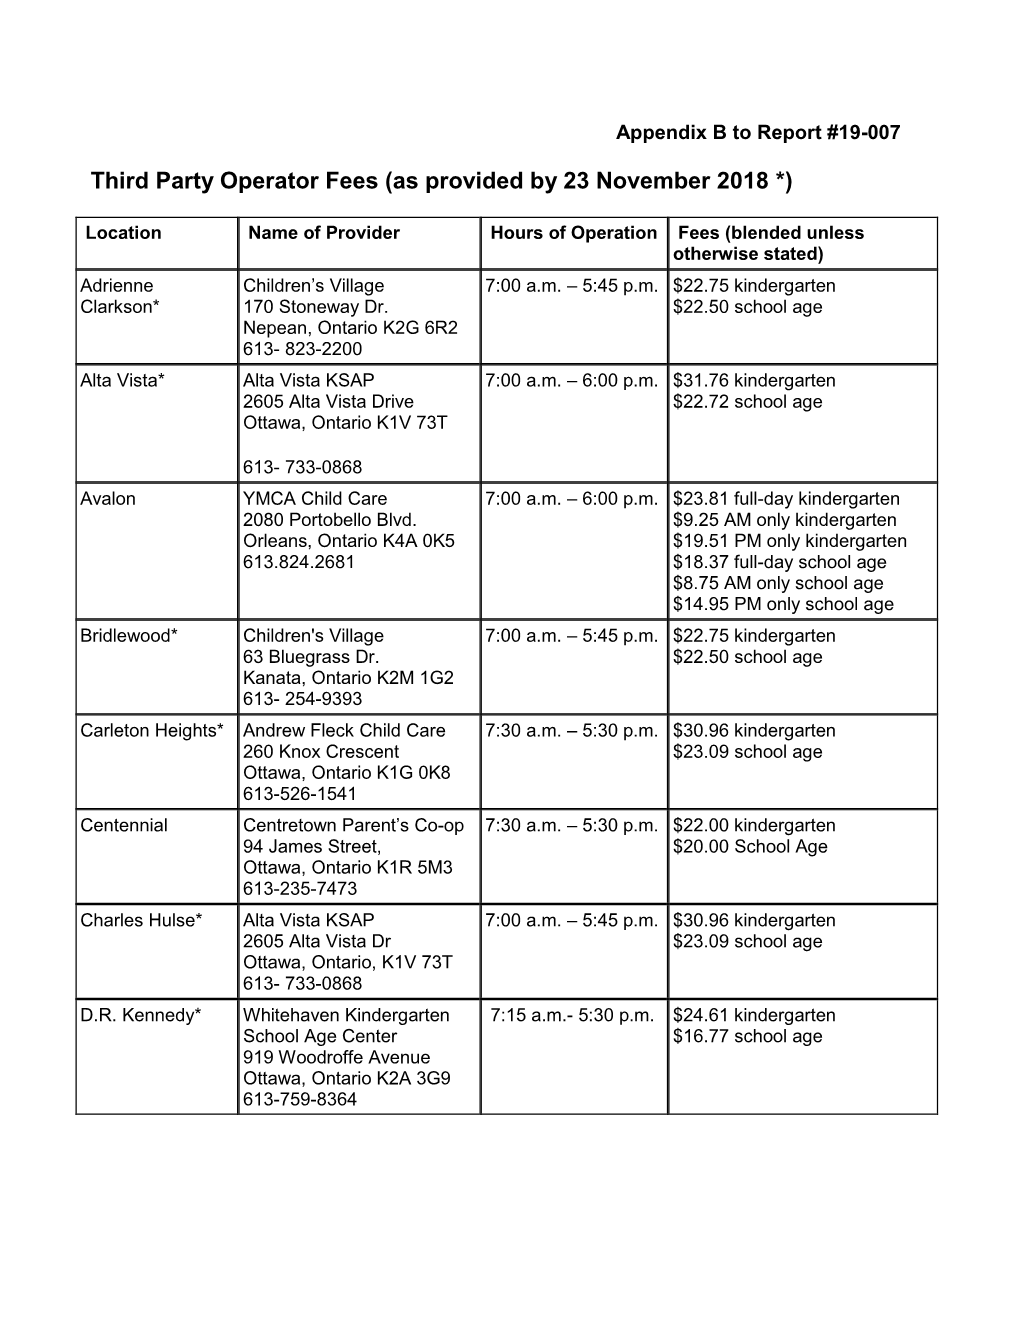 Third Party Operator Fees (As Provided by 23 November 2018 *)